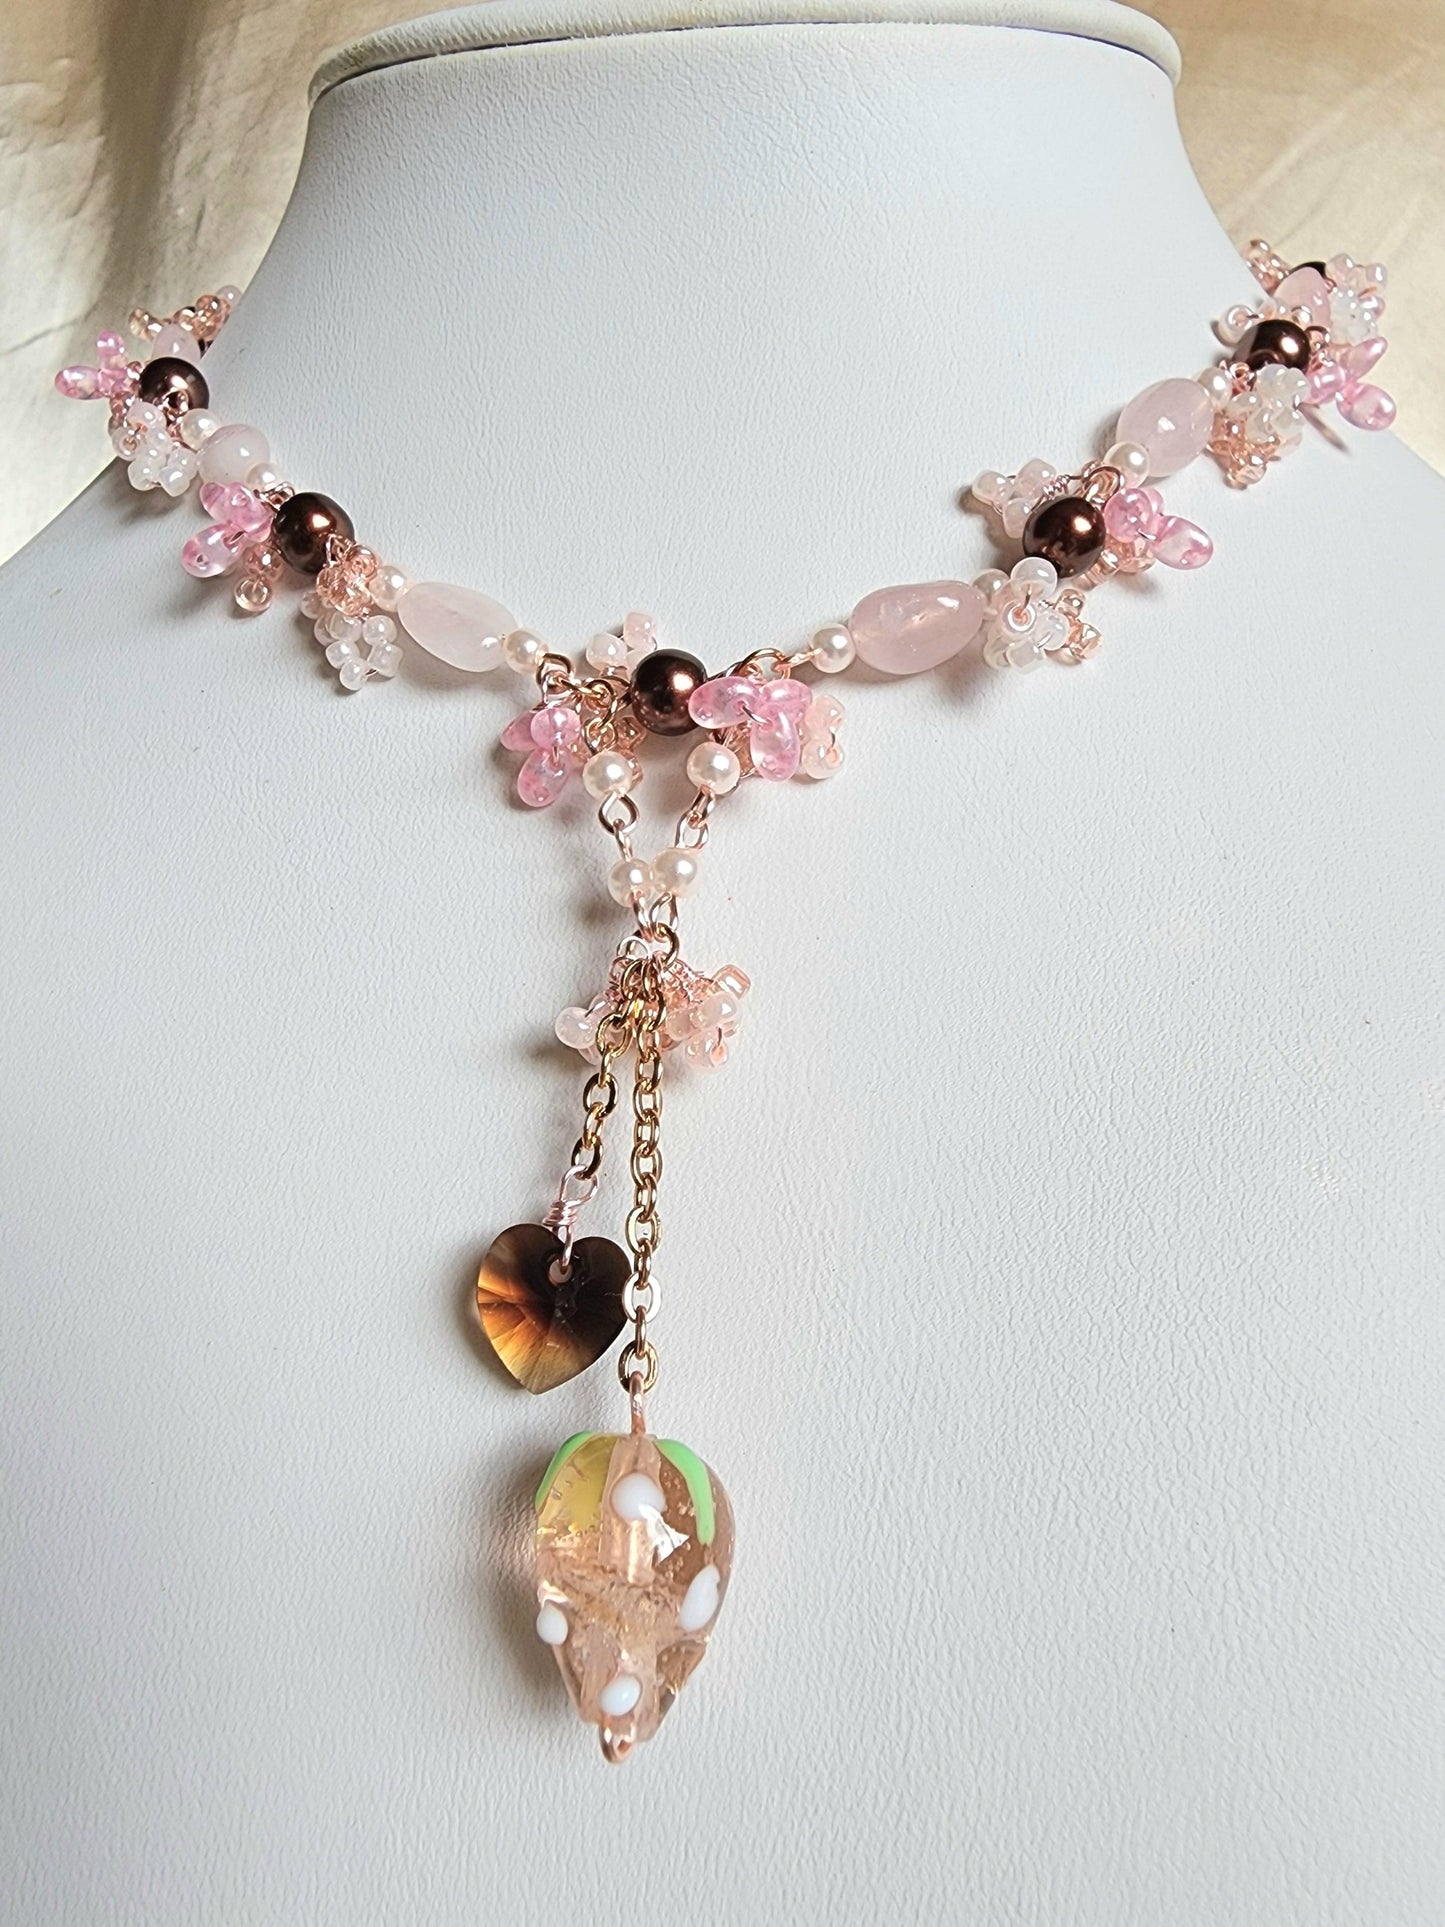 Pink Chocolate Strawberry Necklace - By Cocoyu